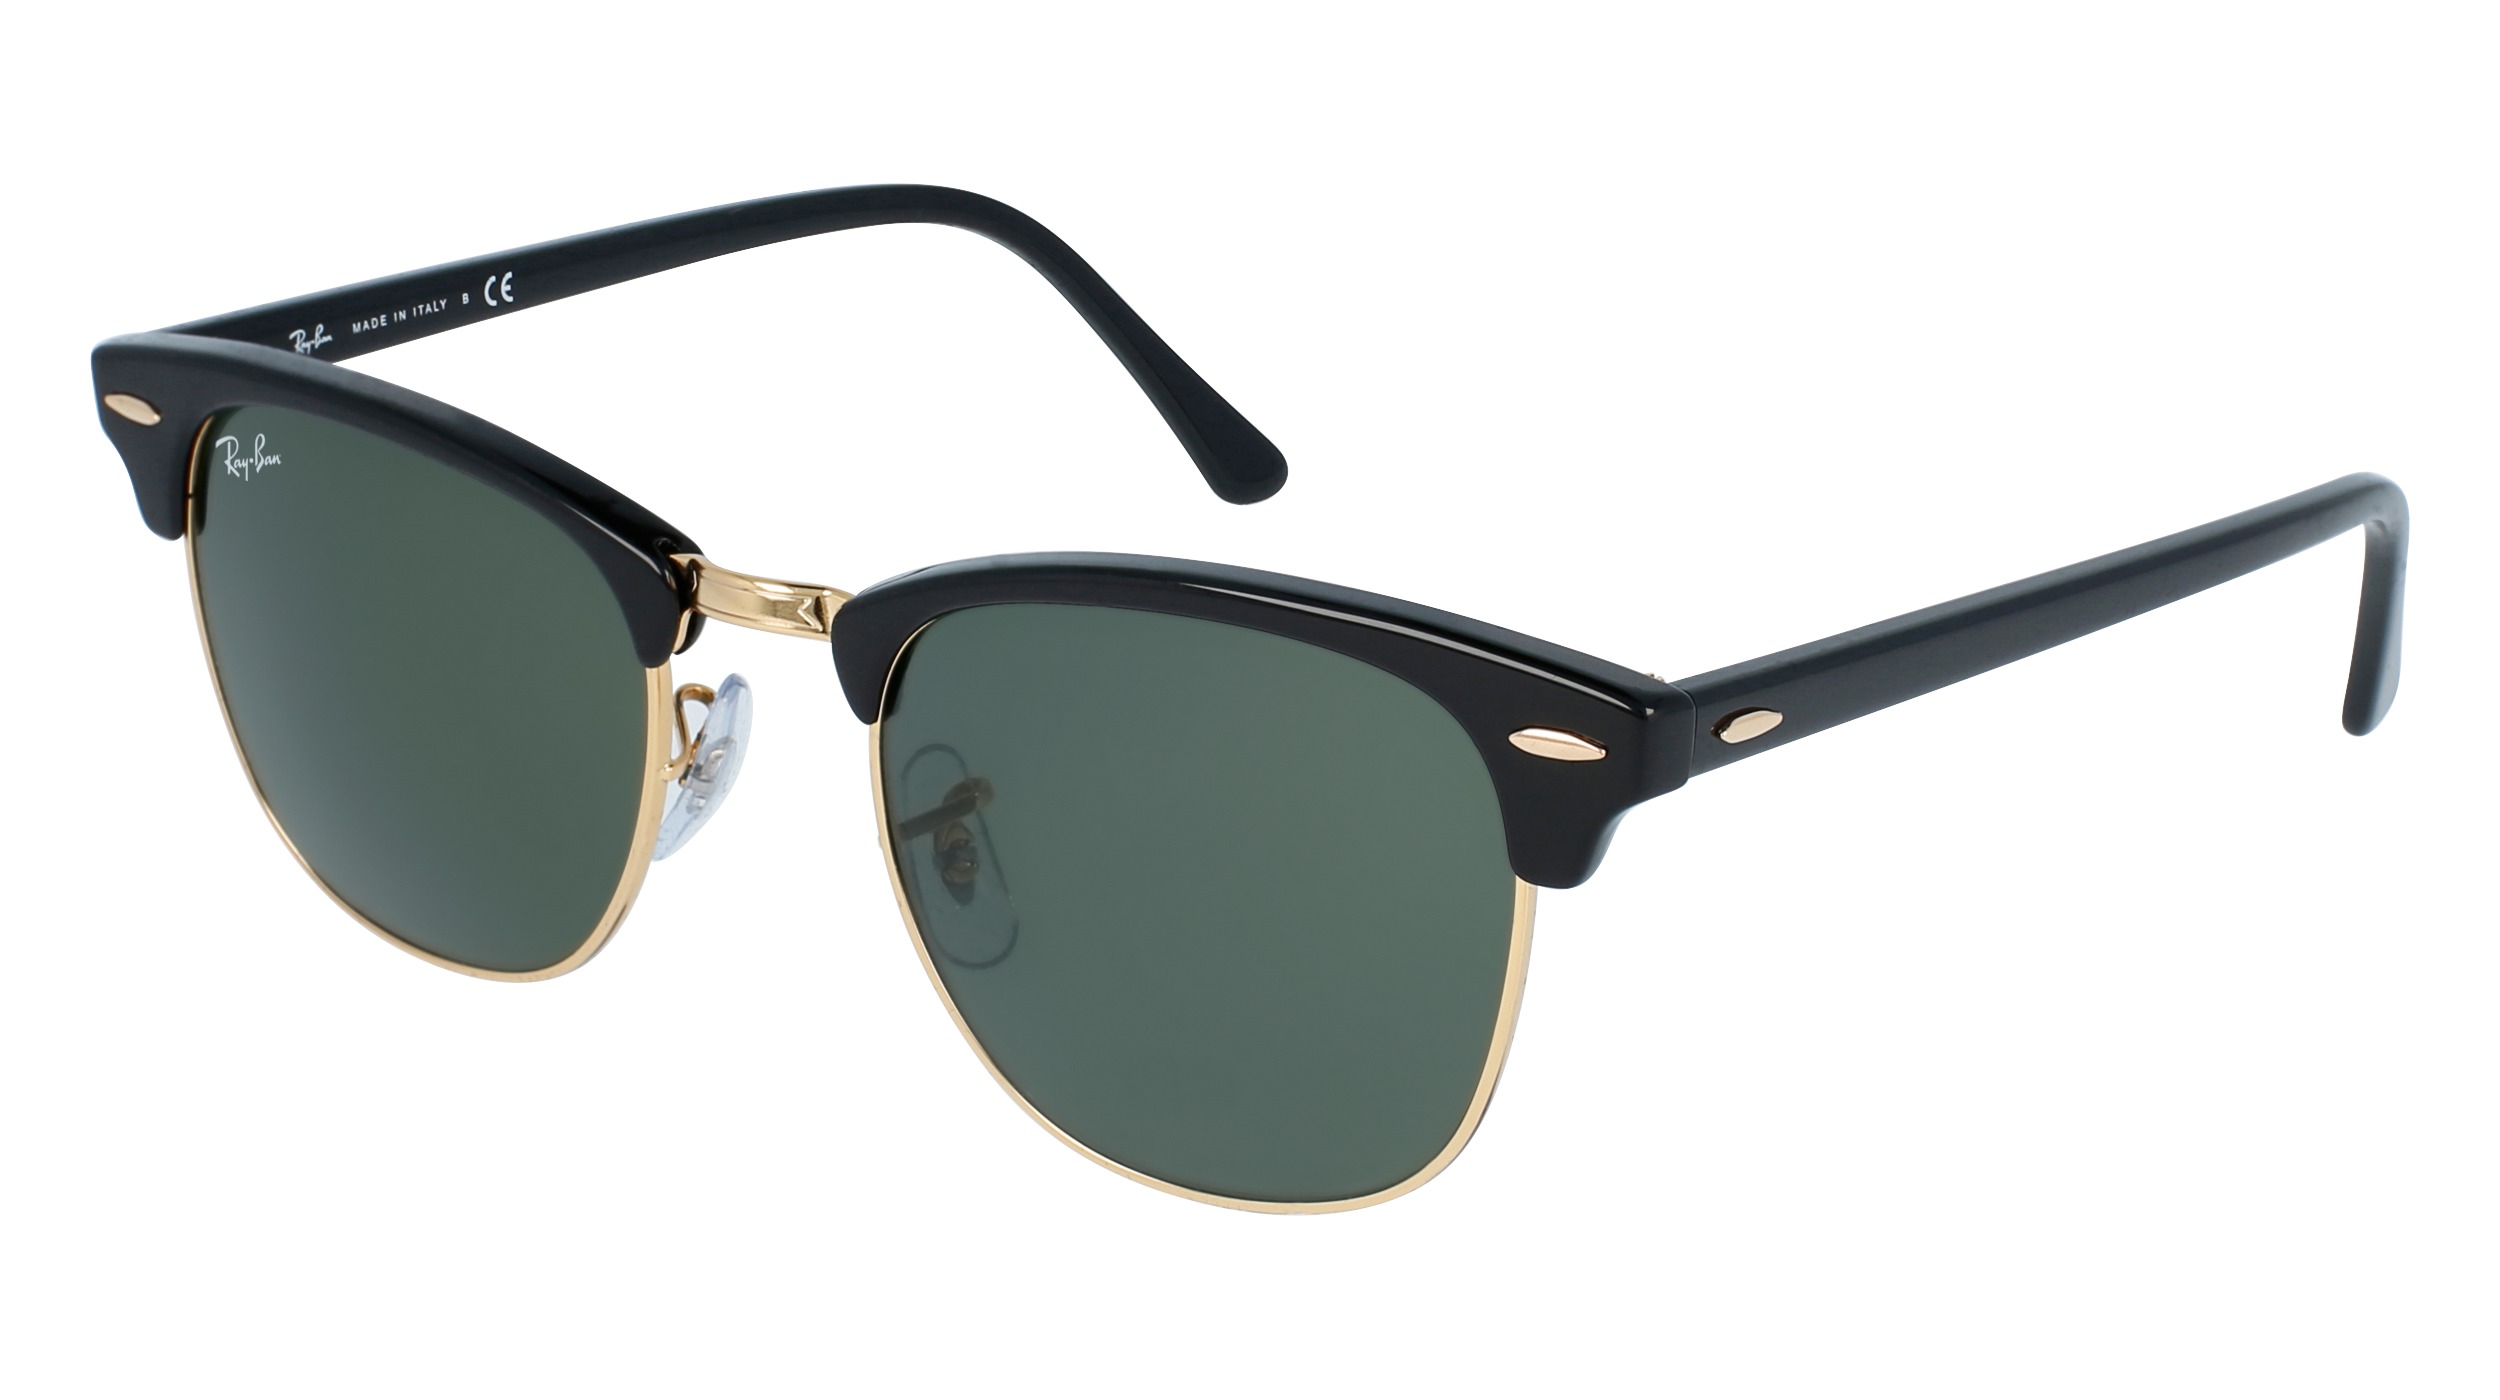 Ray-ban Clubmaster RB3016 - Specsforvets